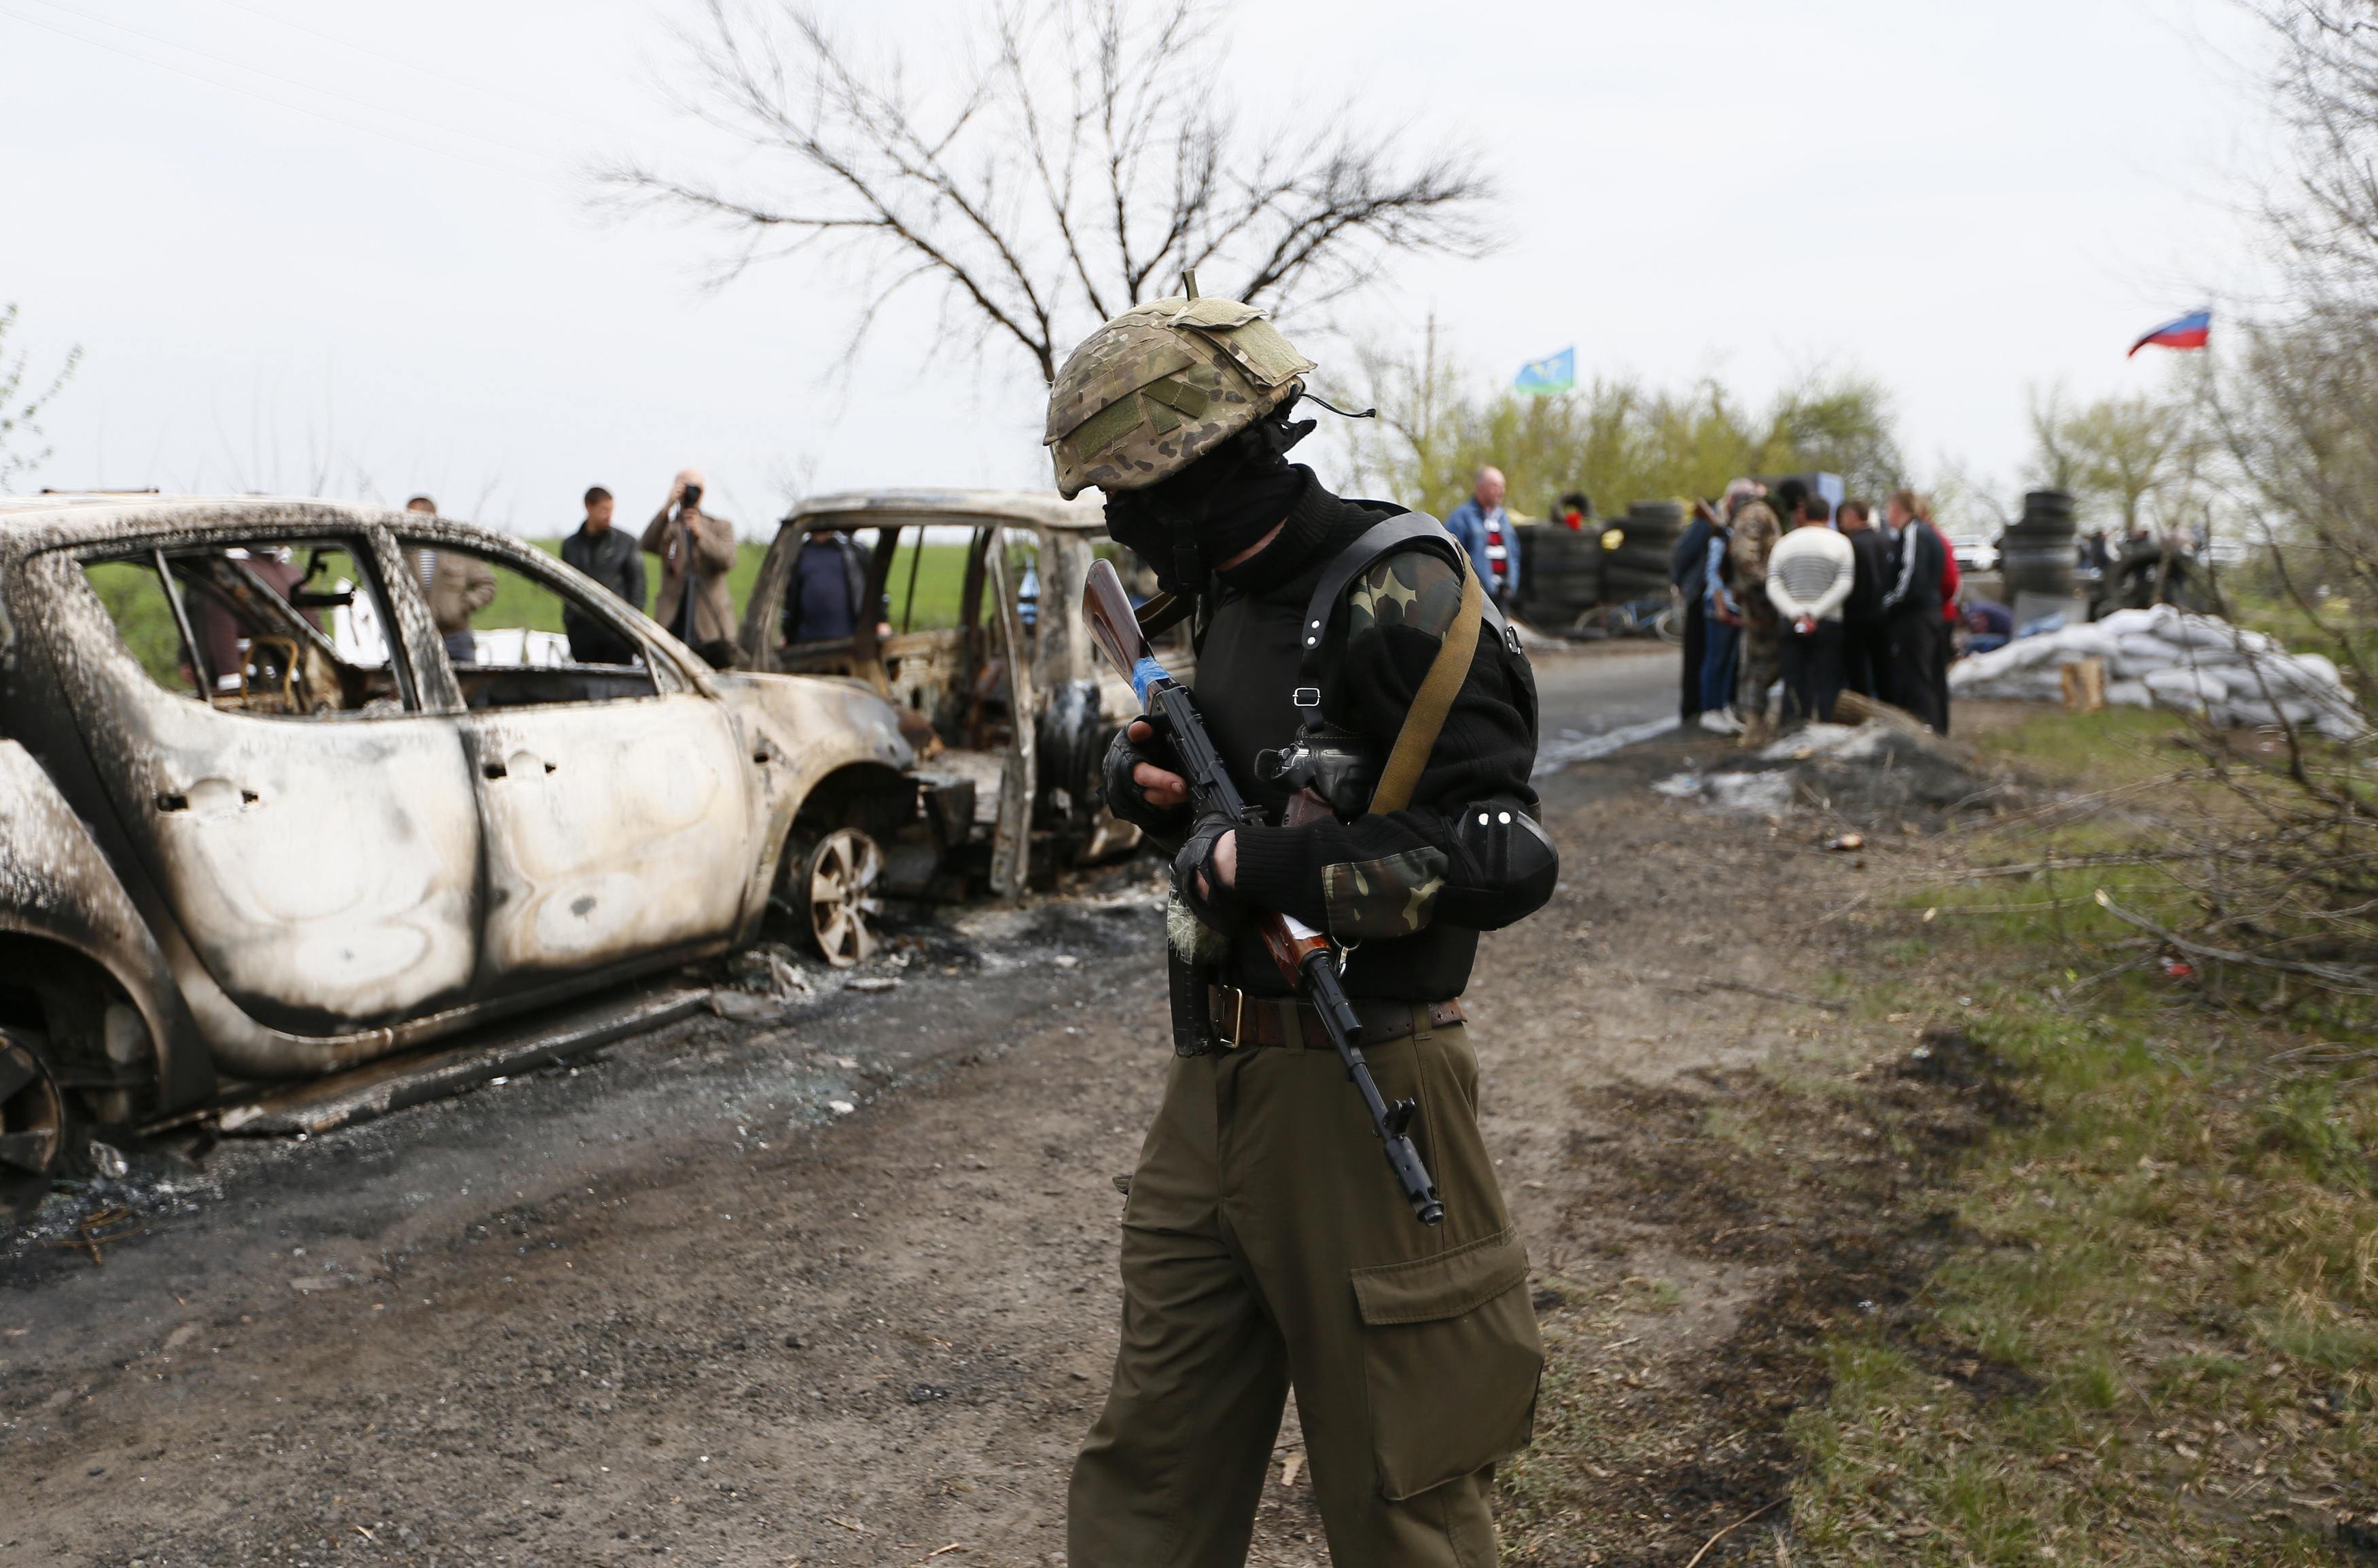 Pro-RussaA Pro-Russian militant walks near a checkpoint that was the scene of a gunfight overnight near the city of Slaviansk, April 20, 2014.ian militant walks near a checkpoint which was the scene of a gunfight overnight near the city of Slaviansk